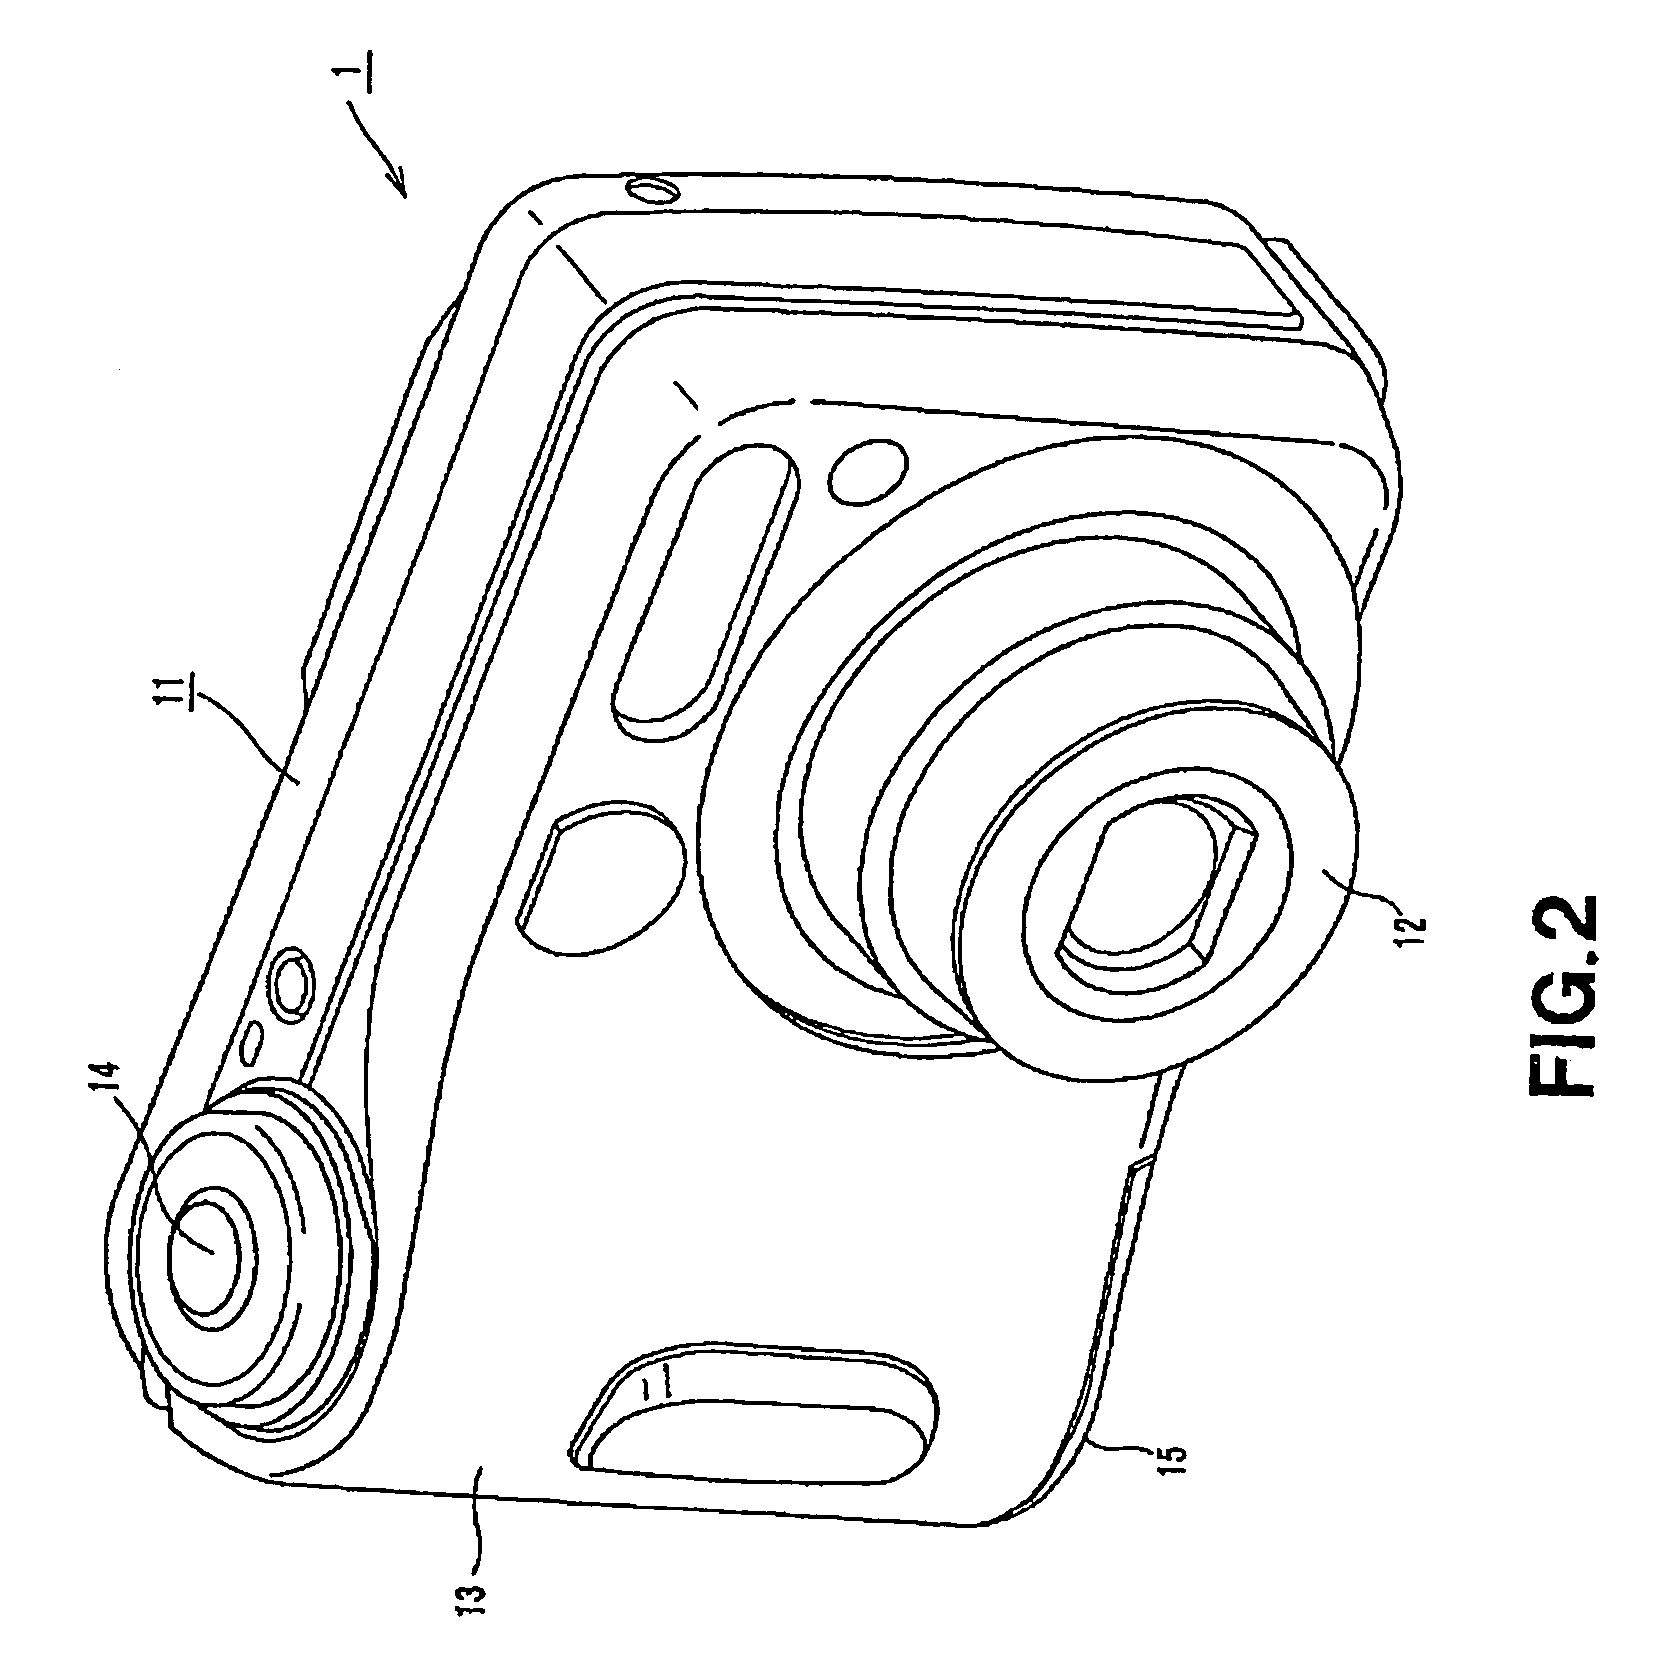 DC adapter and electronic apparatus using the same